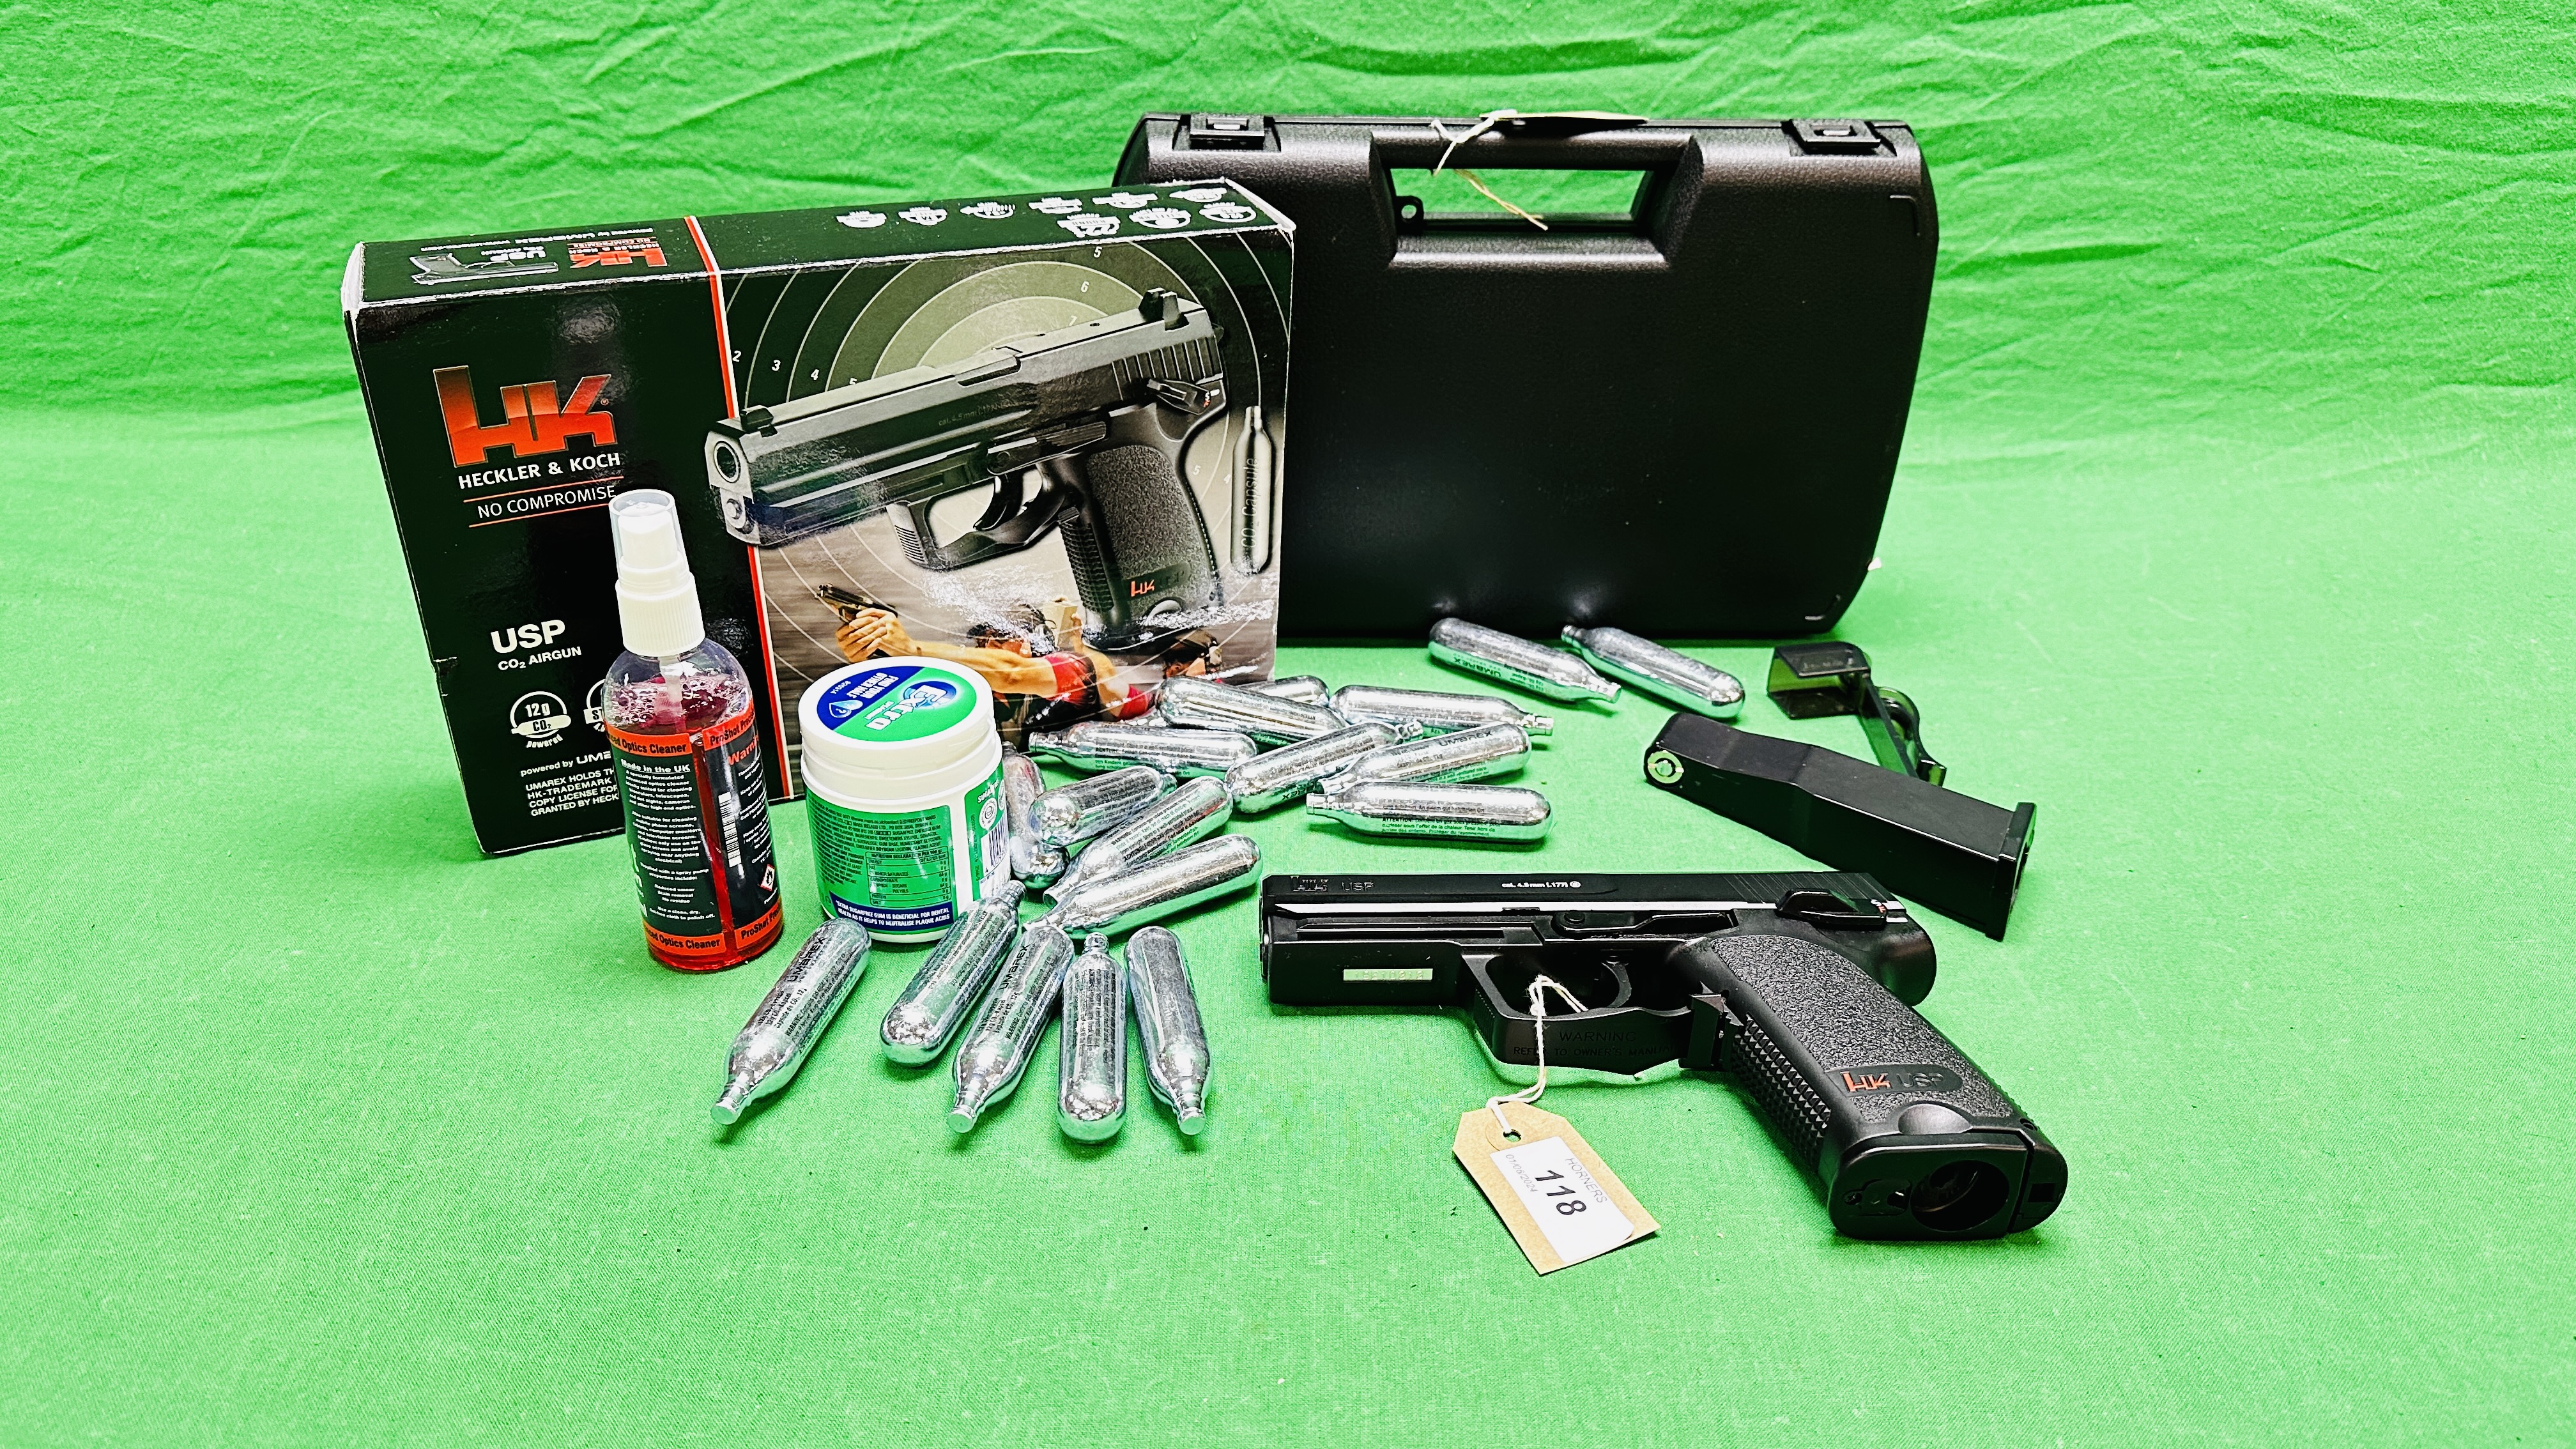 A BOXED HECKLER & KOCH USP 22 ROUND CO2 STEEL BB AIR PISTOL COMPLETE WITH HARD TRANSIT CASE,